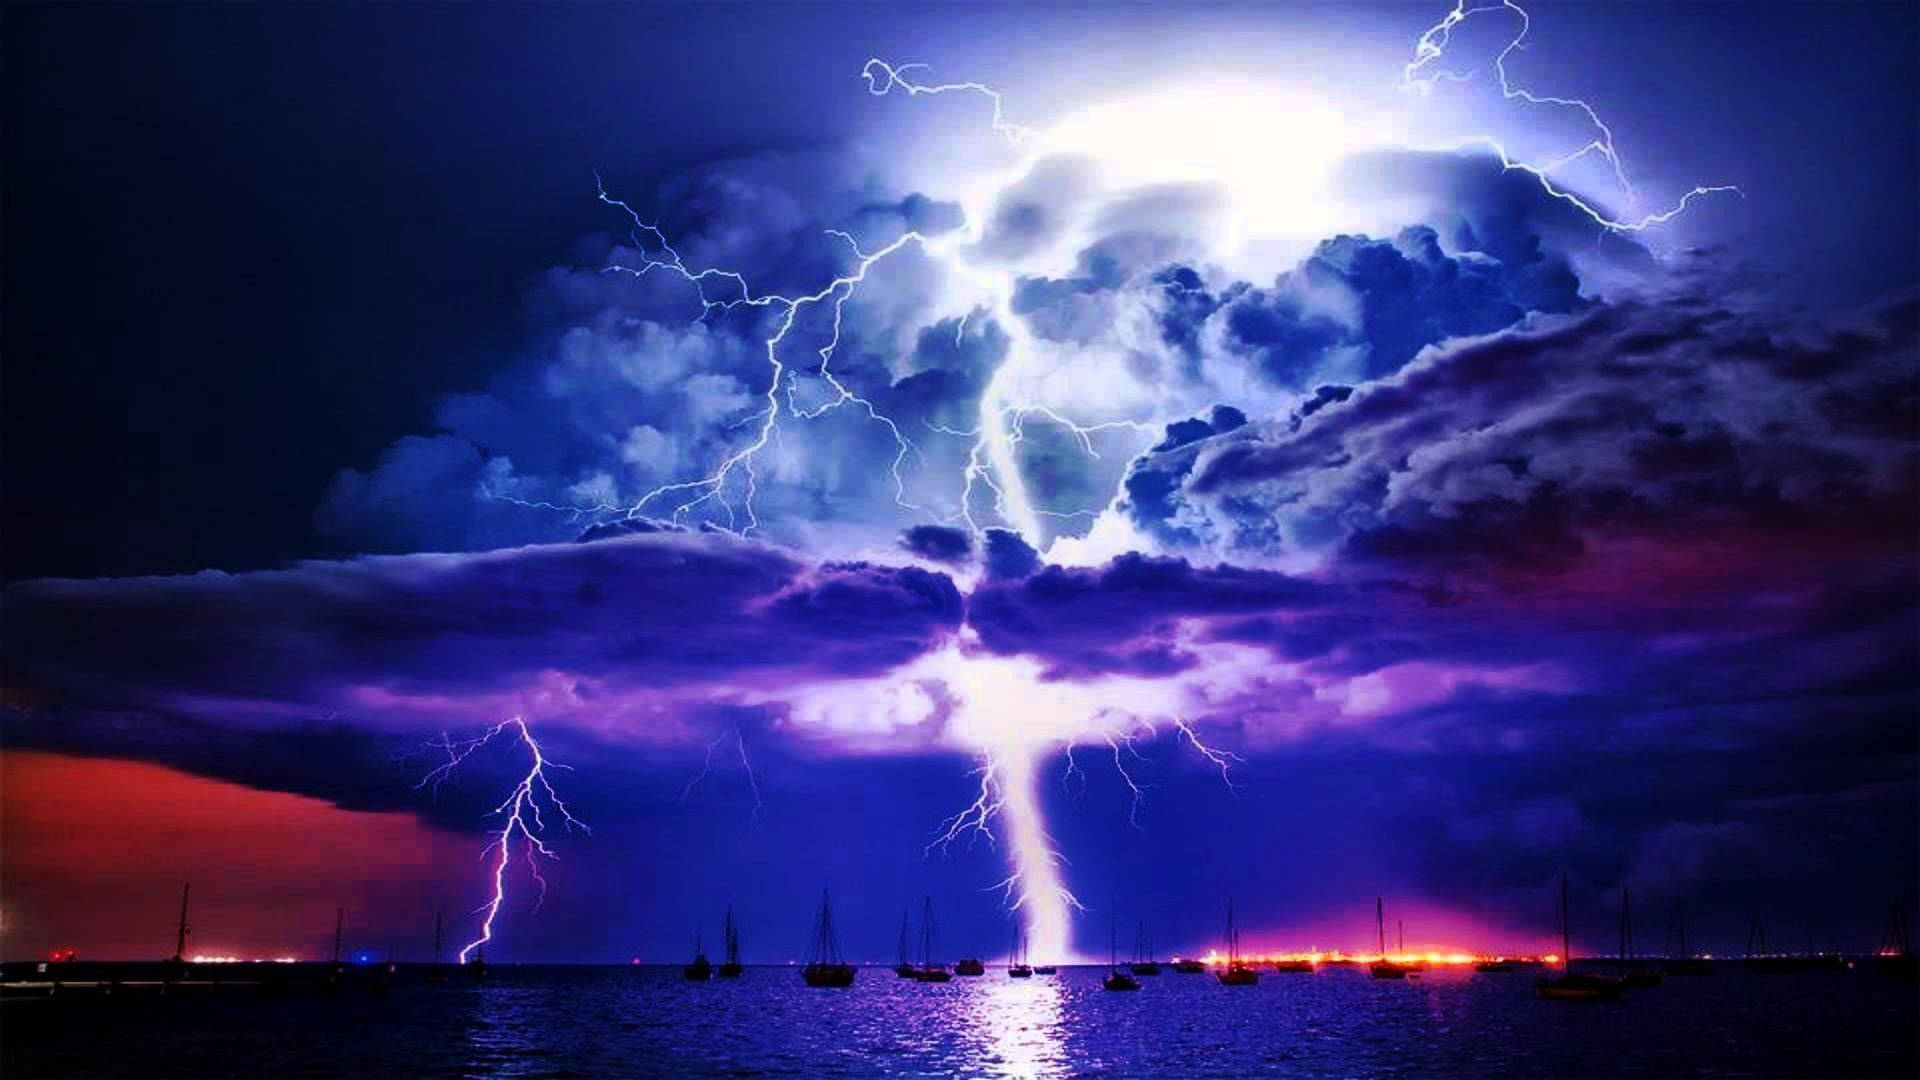 Lightning Storms In The Sky With Boats And Boats Wallpaper